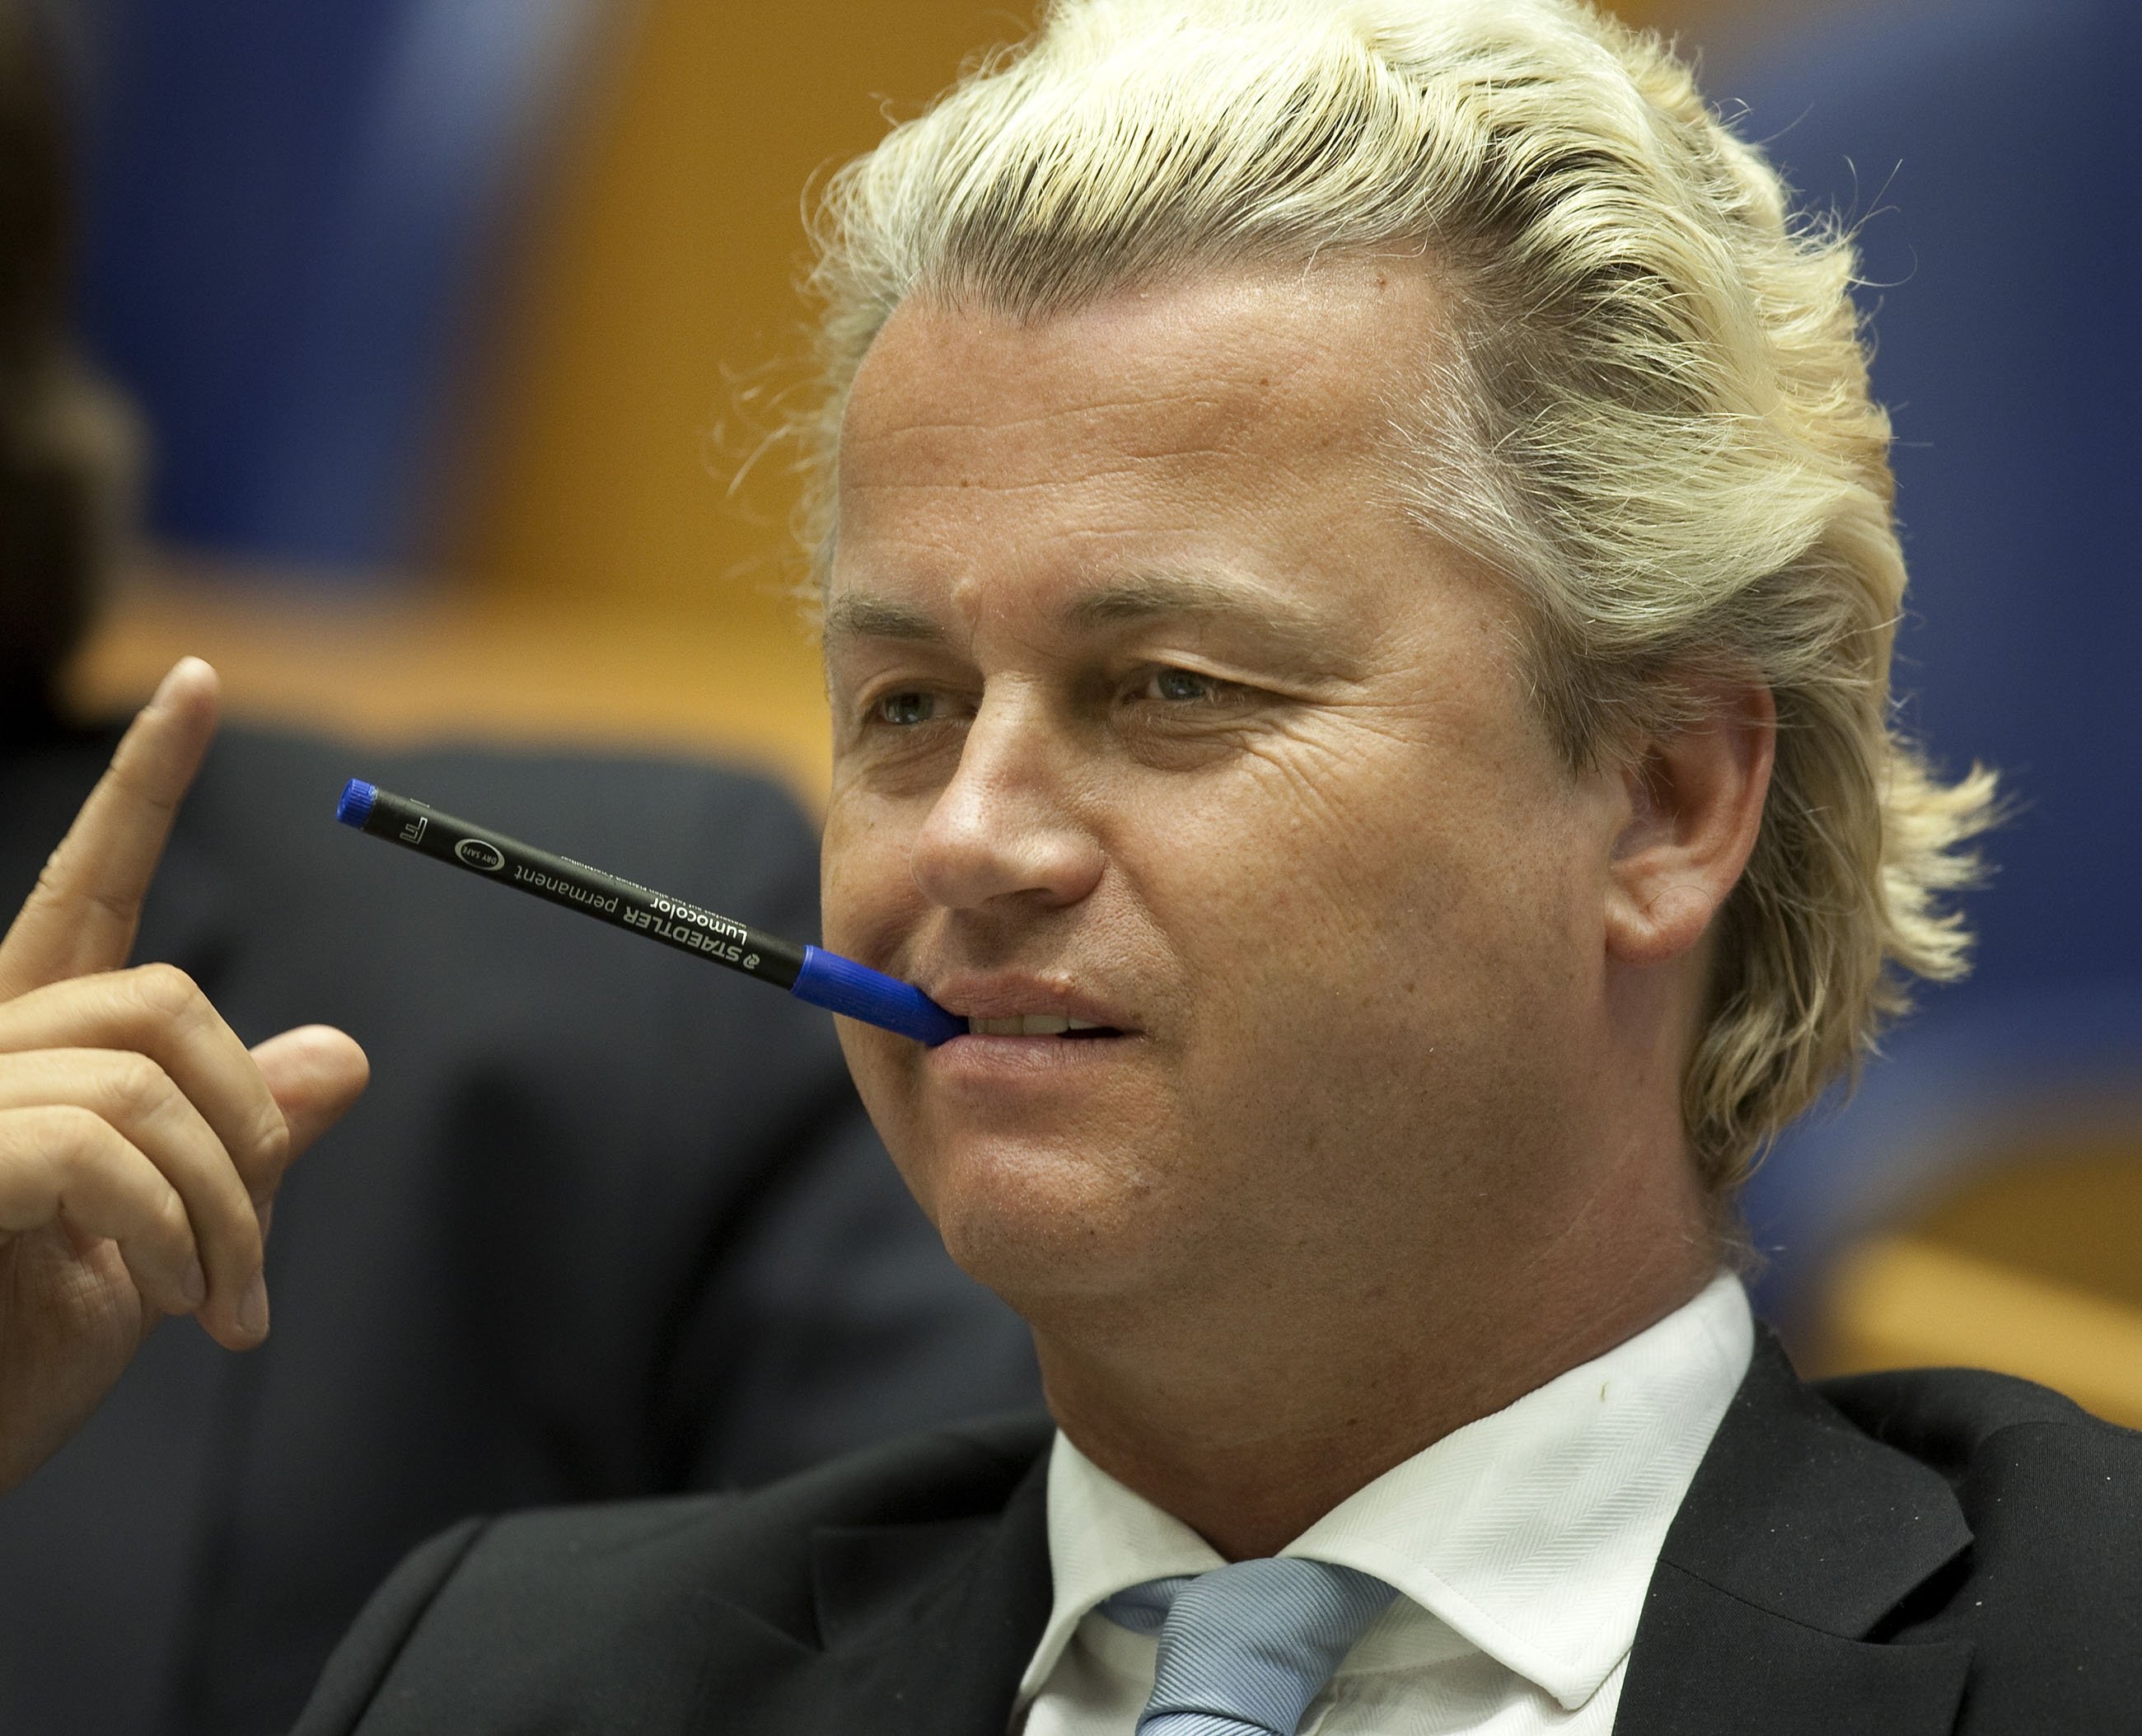 Geert Wilders, party leader of the Party for Freedom (PVV), chews a pen during weekly question time in the plenary room of the House of Representatives, The Hague, Netherlands, March 17, 2017. (EPA)